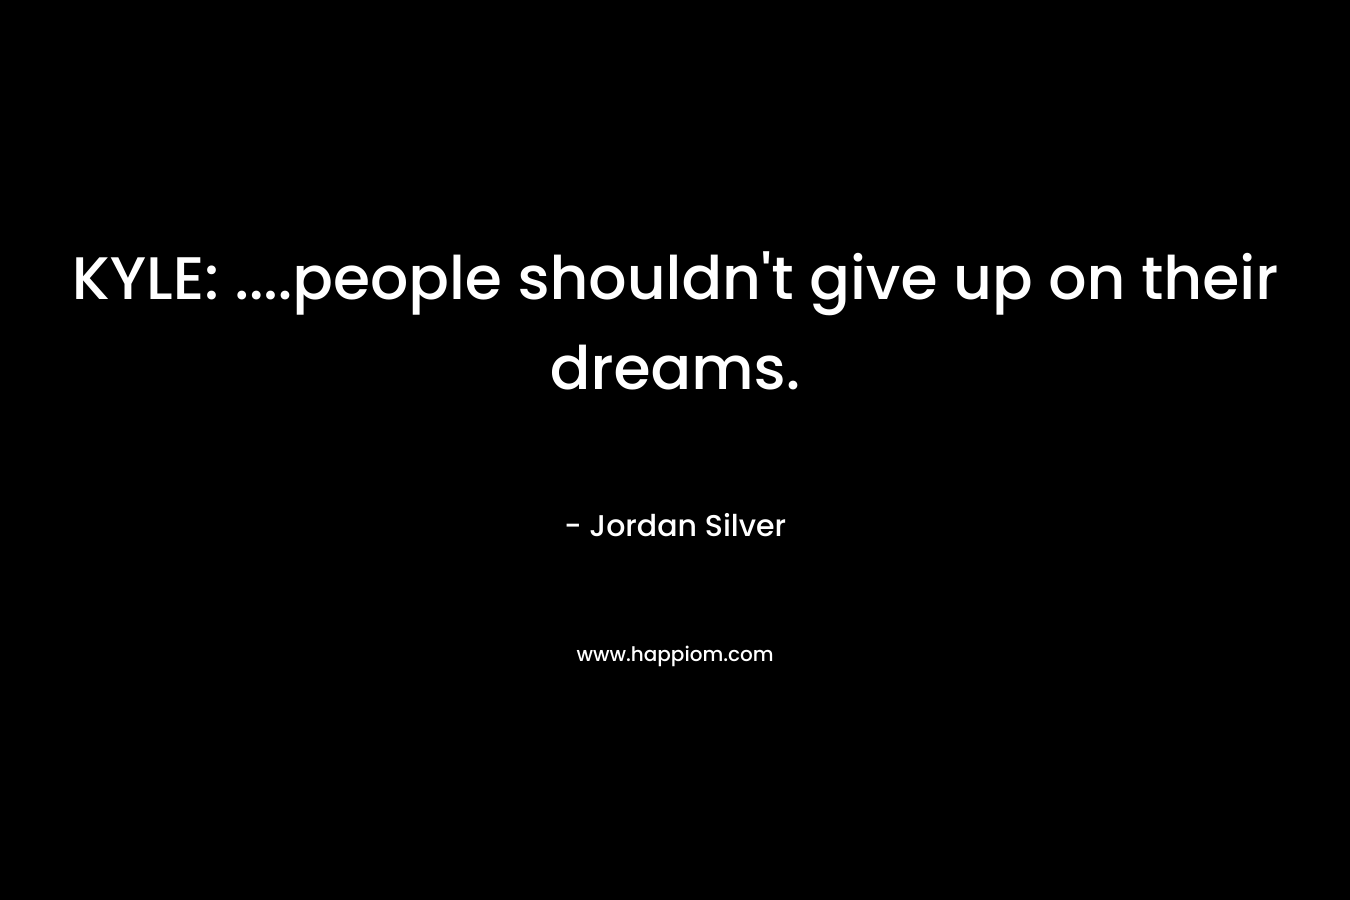 KYLE: ….people shouldn’t give up on their dreams. – Jordan Silver